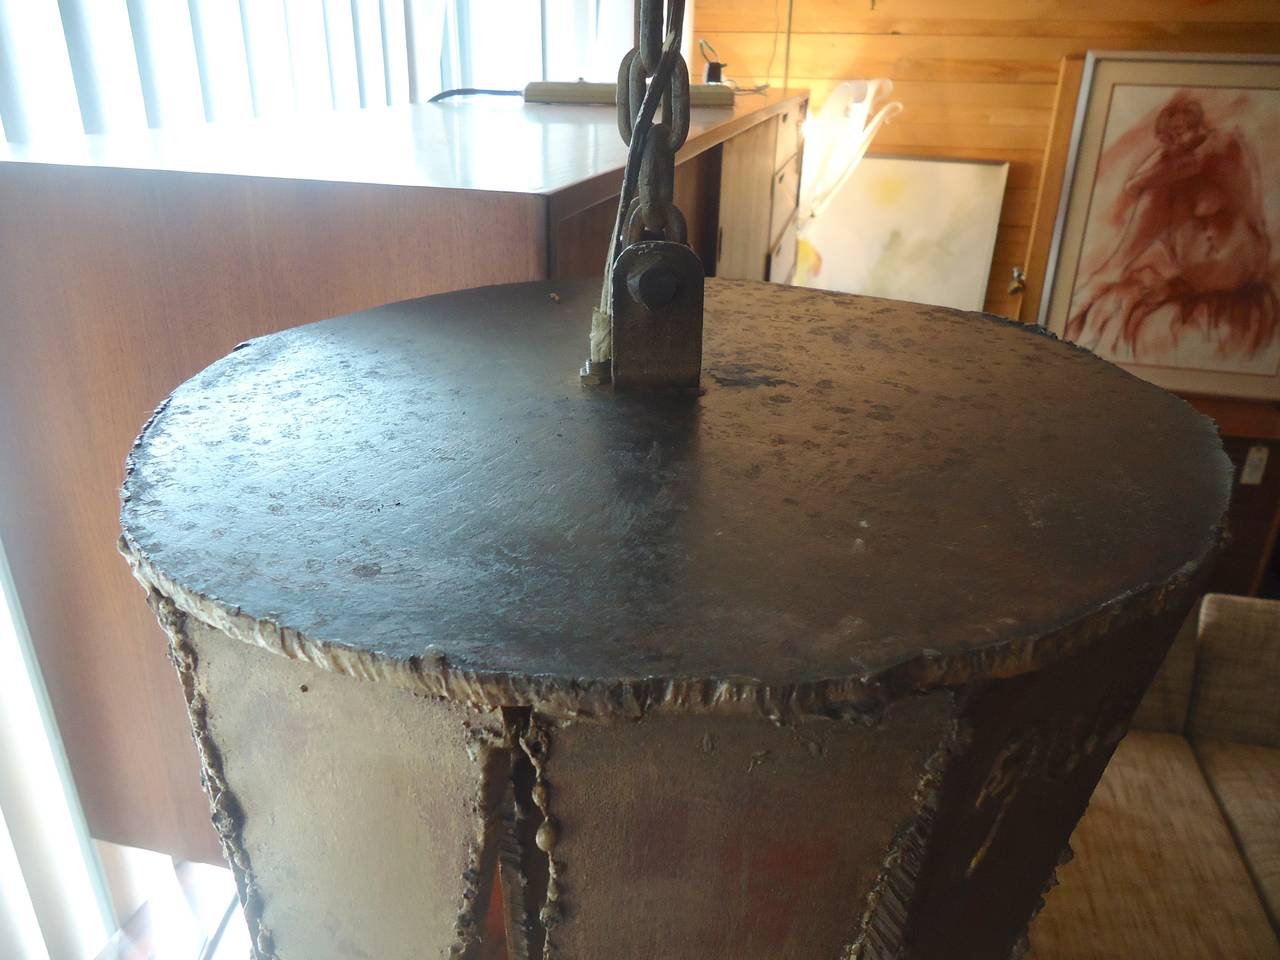 Awesome handcrafted lamp made of extremely heavy torch cut metal. Reminiscent of a stalactite formation, single medium socket, intentional rough cut industrial look. One of a kind statement piece!

(Please confirm item location, NY or NJ, with